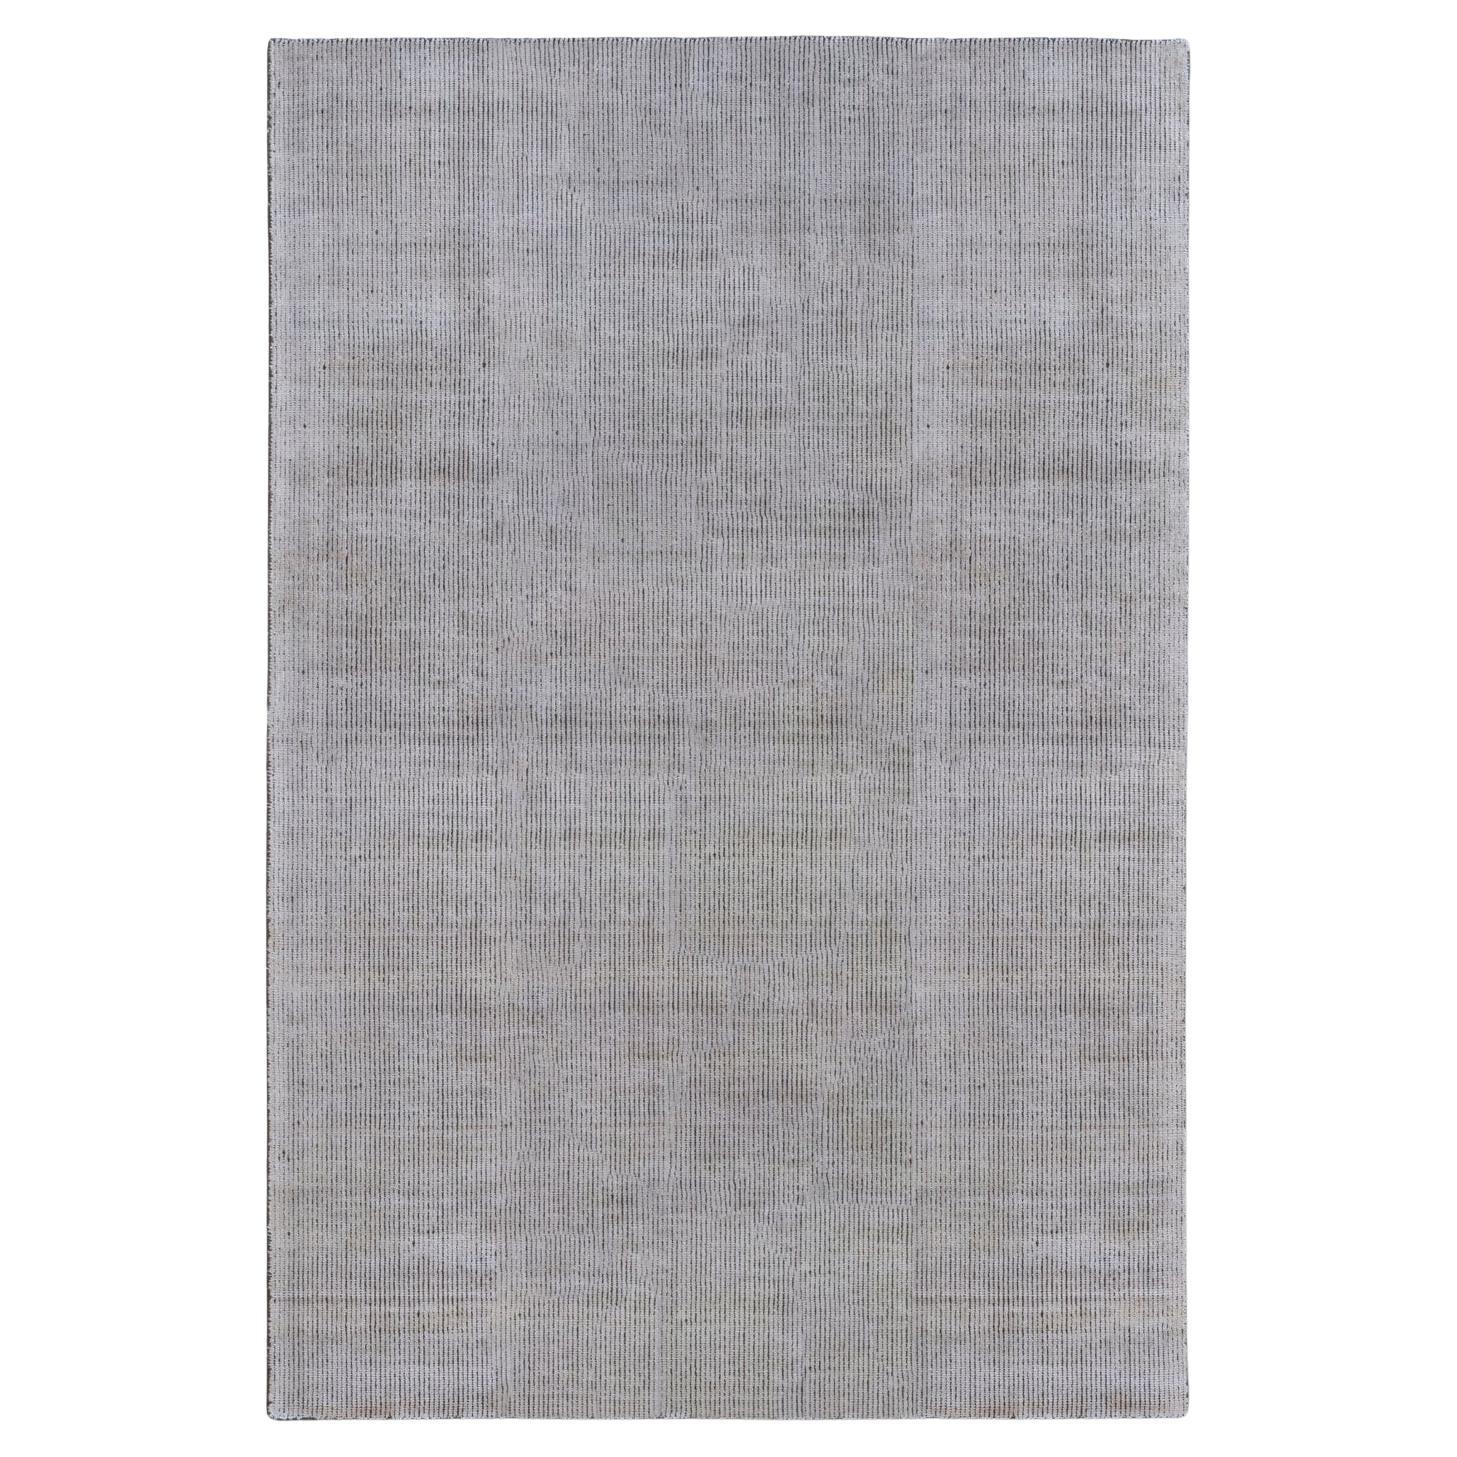 21st Cent Eco-Friendly Velvety White Rug by Deanna Comellini In Stock 200x300 cm For Sale